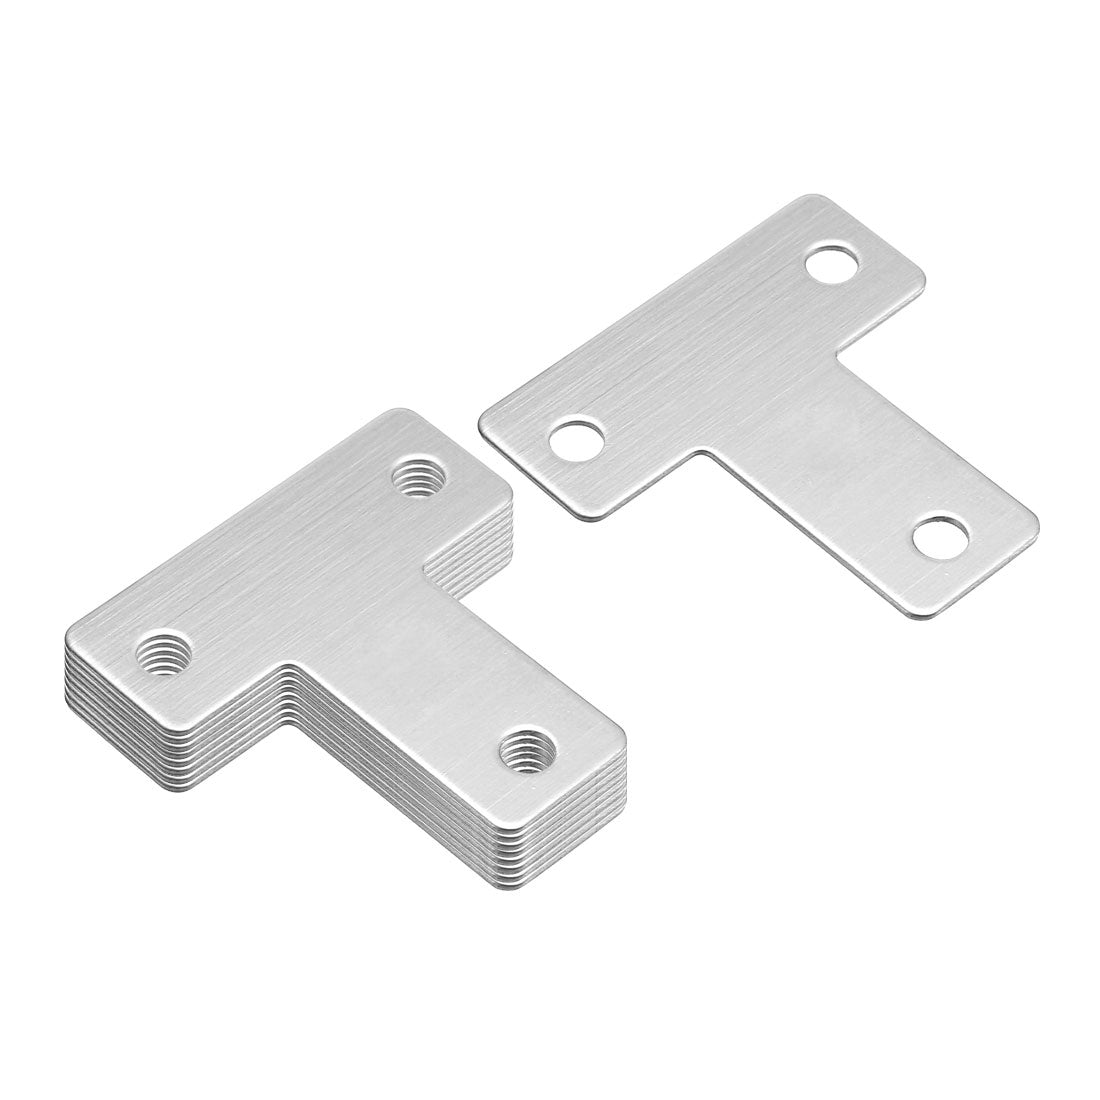 uxcell Uxcell Flat T Shape Repair Mending Plate, 43mmx43mm, Stainless Steel Joining Bracket Support Brace, 10 Pcs